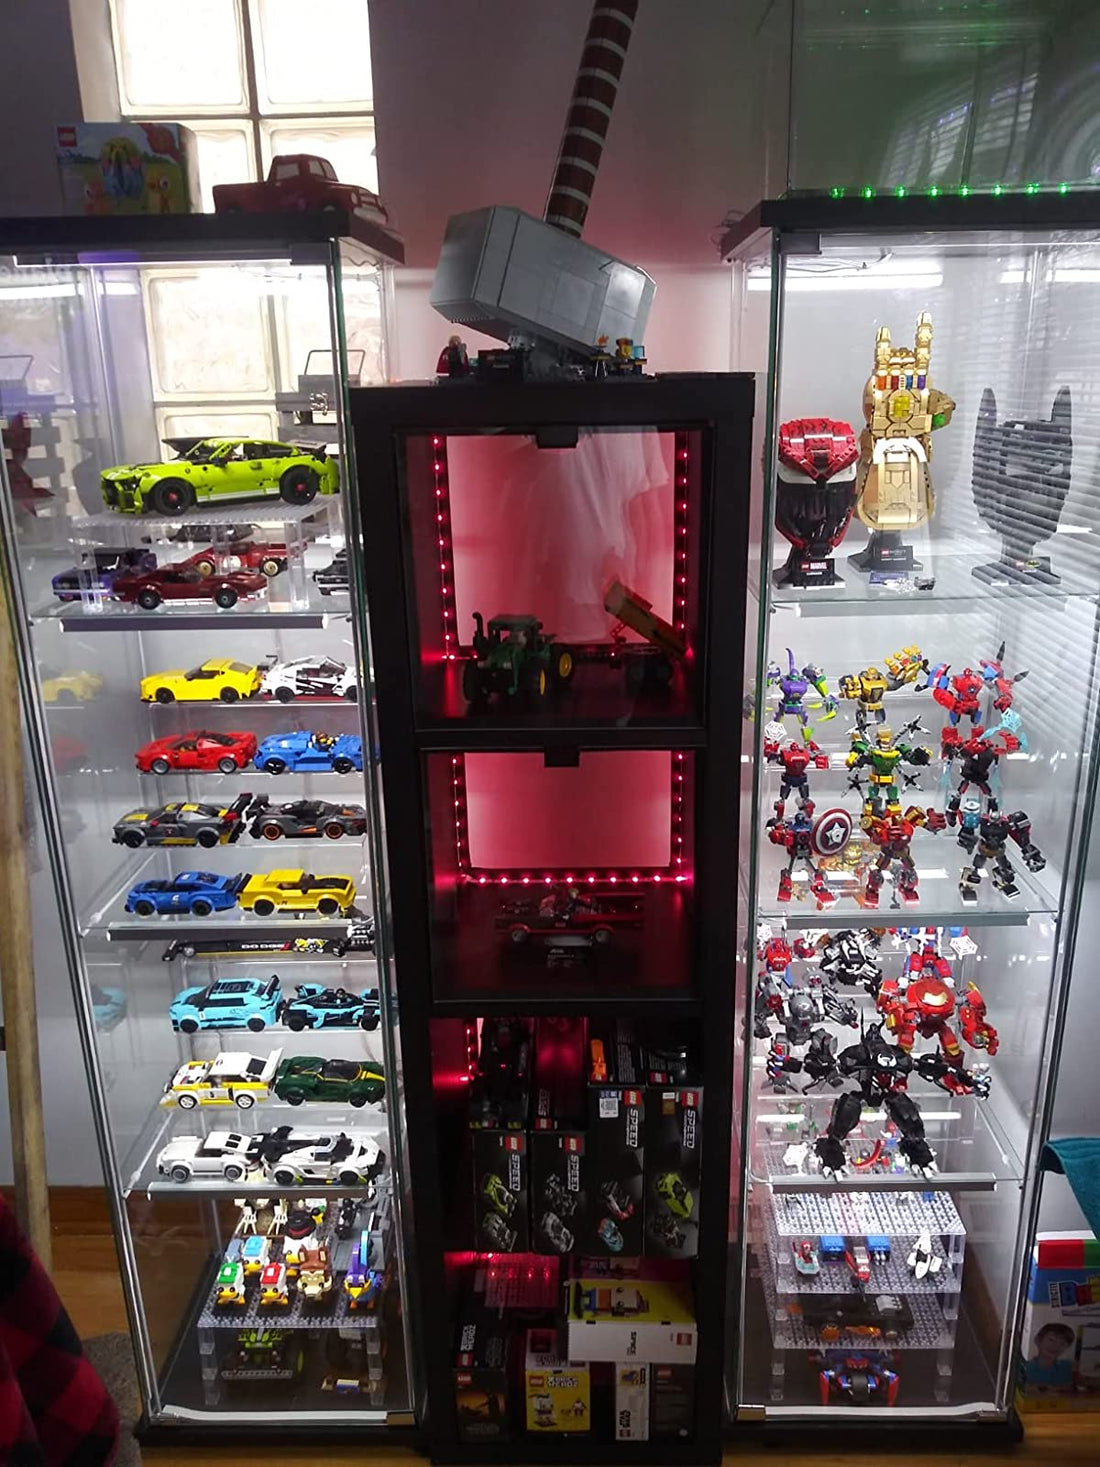 The PERFECT lighting for your DETOLF !!